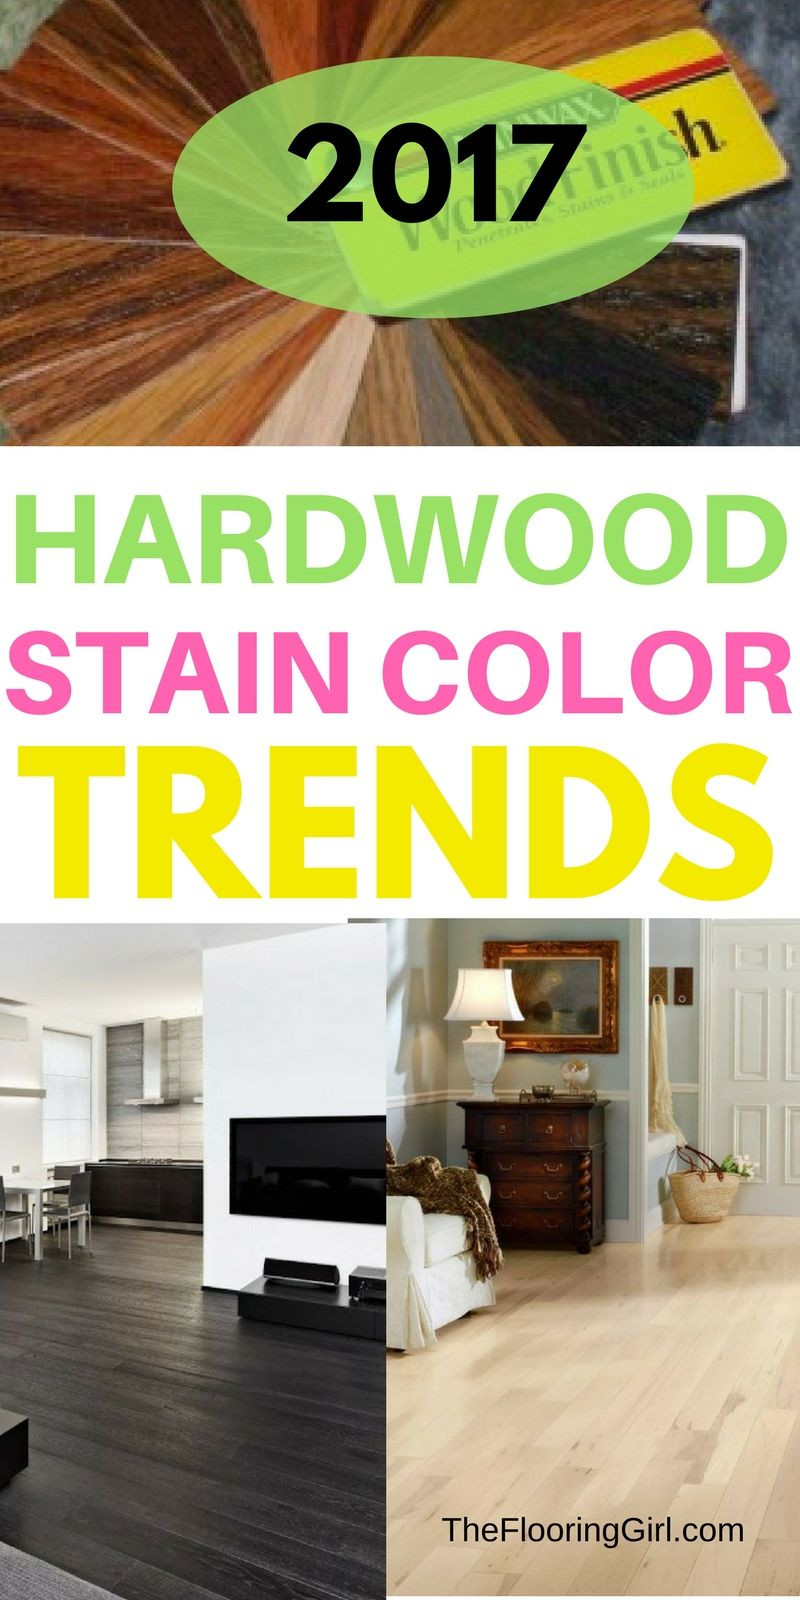 14 Fashionable How to Make Hardwood Floor Cleaner 2024 free download how to make hardwood floor cleaner of hardwood flooring stain color trends 2018 more from the flooring throughout hardwood flooring stain color trends for 2017 hardwood colors that are in st